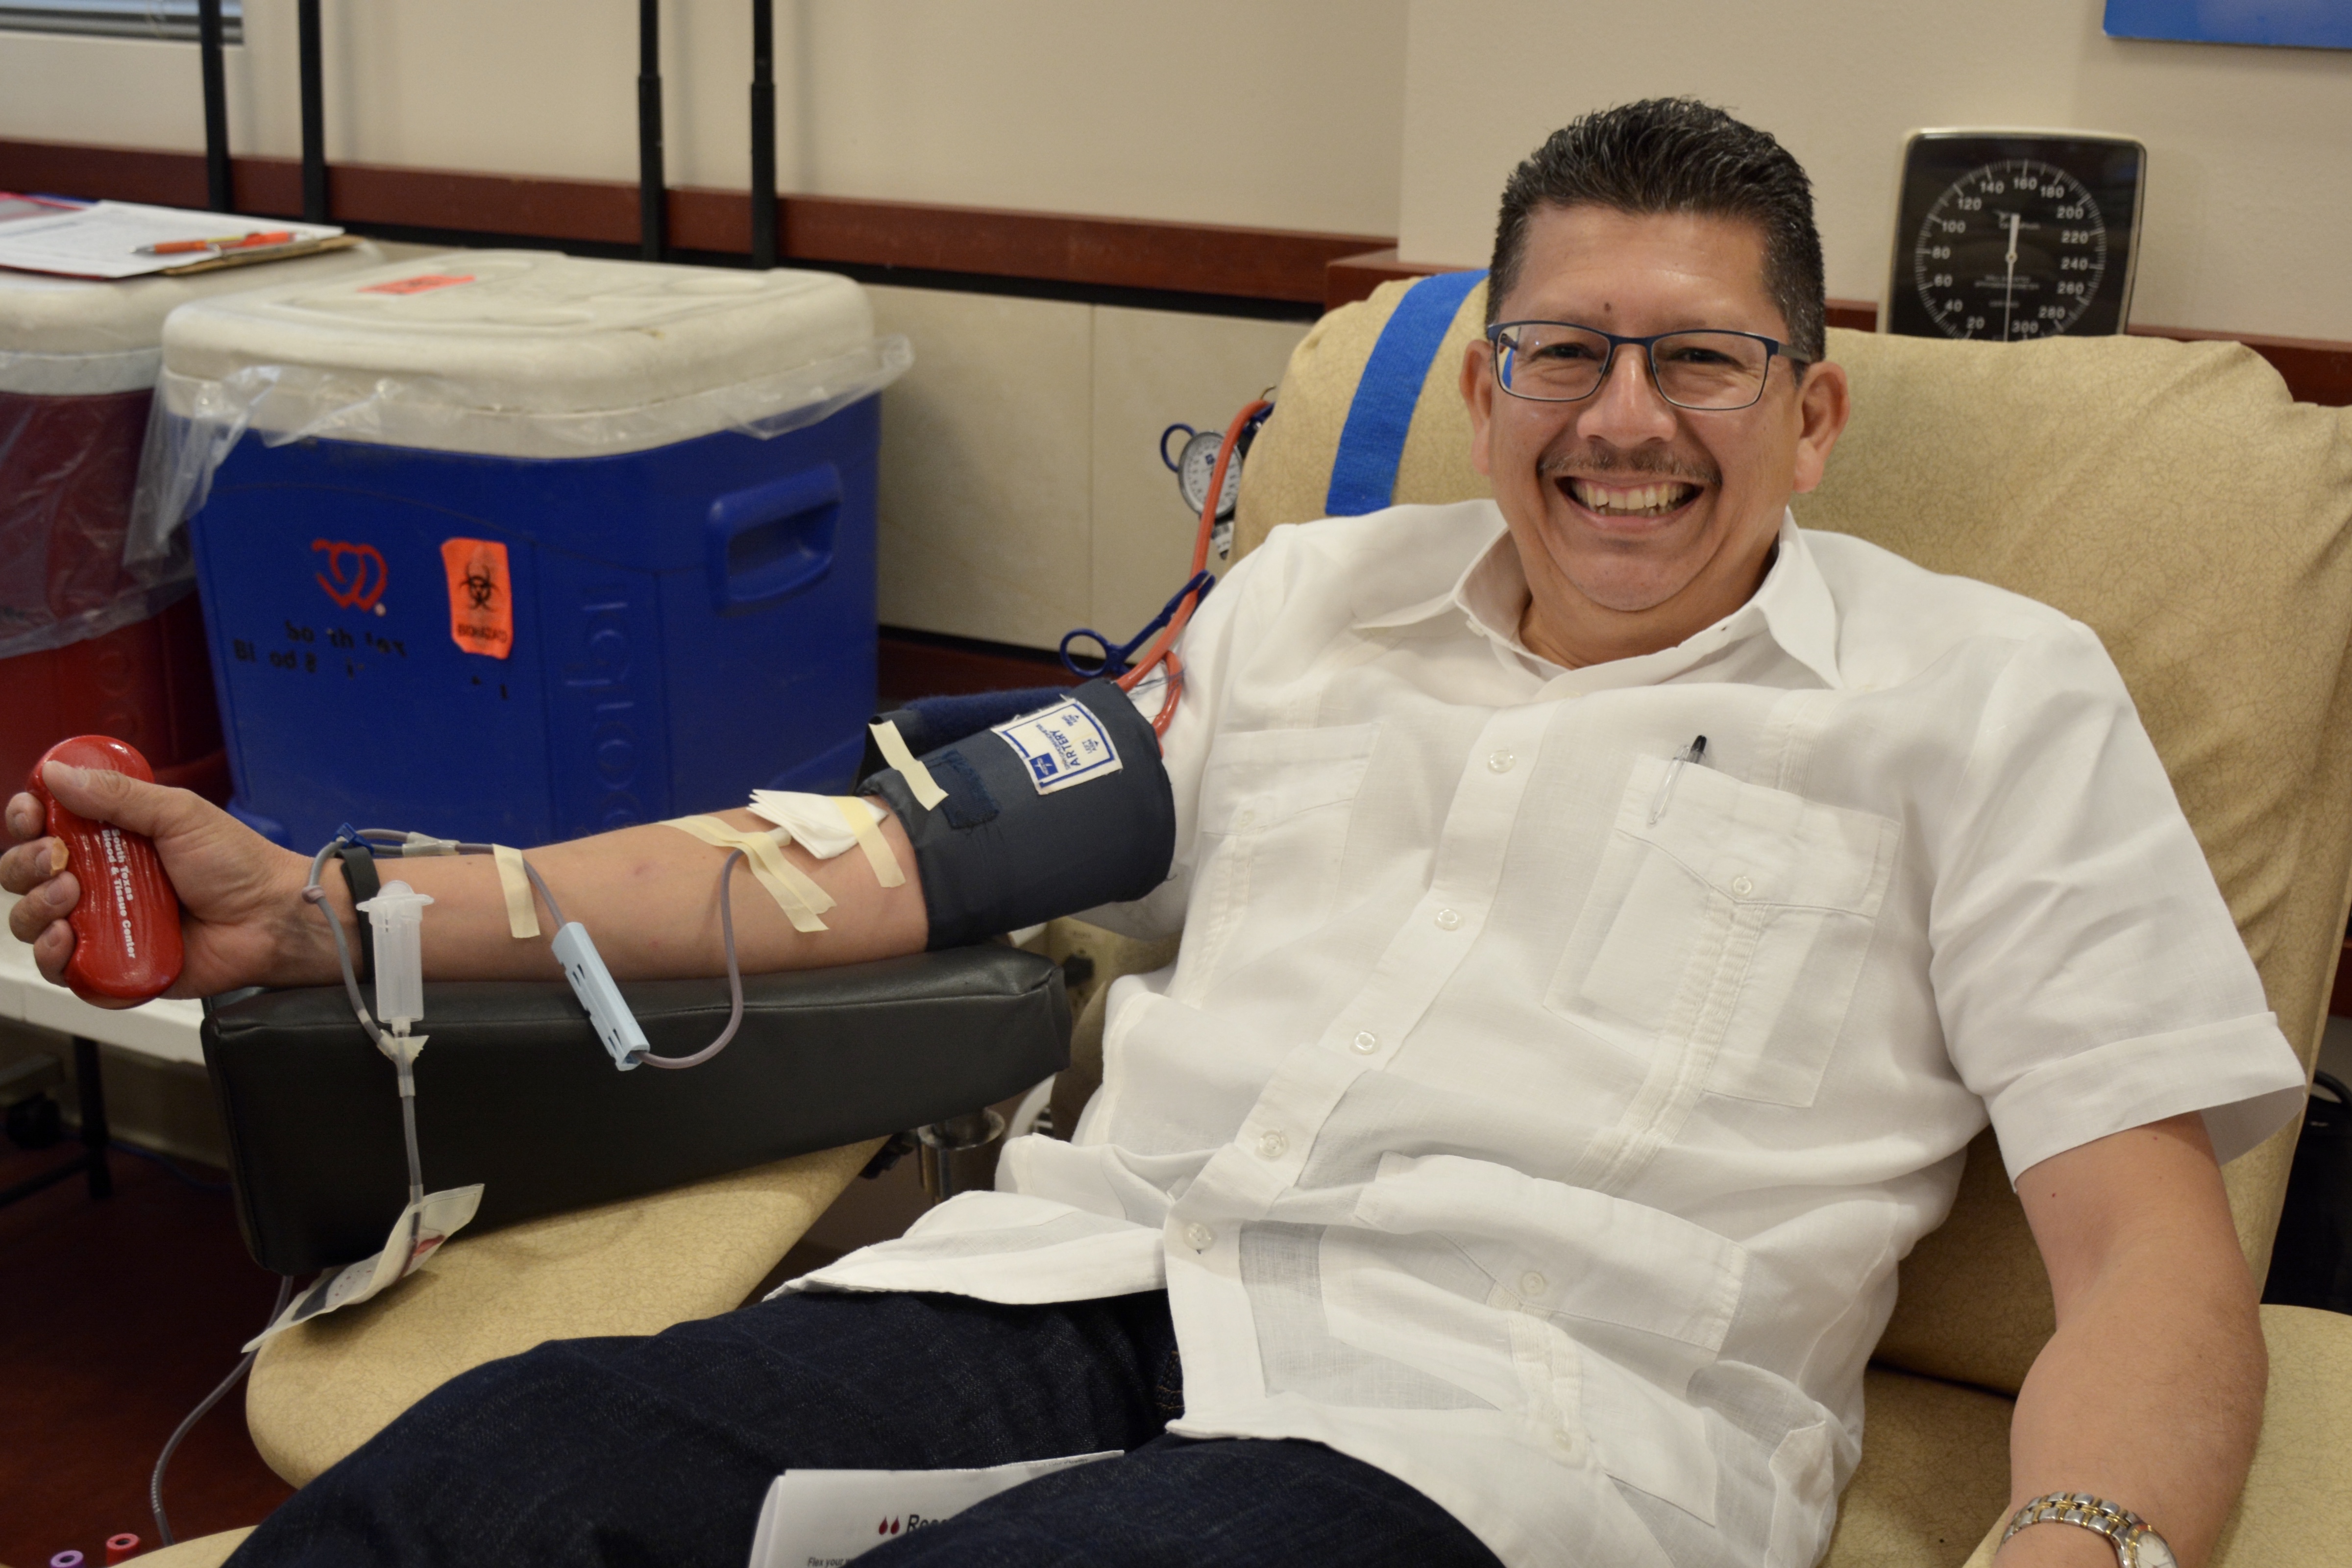 Richard Perez, President and CEO of the San Antonio Chamber of Commerce, donates blood at the South Texas Blood & Tissue Center Donor Pavilion following Saturday's news conference about the critical need for blood.